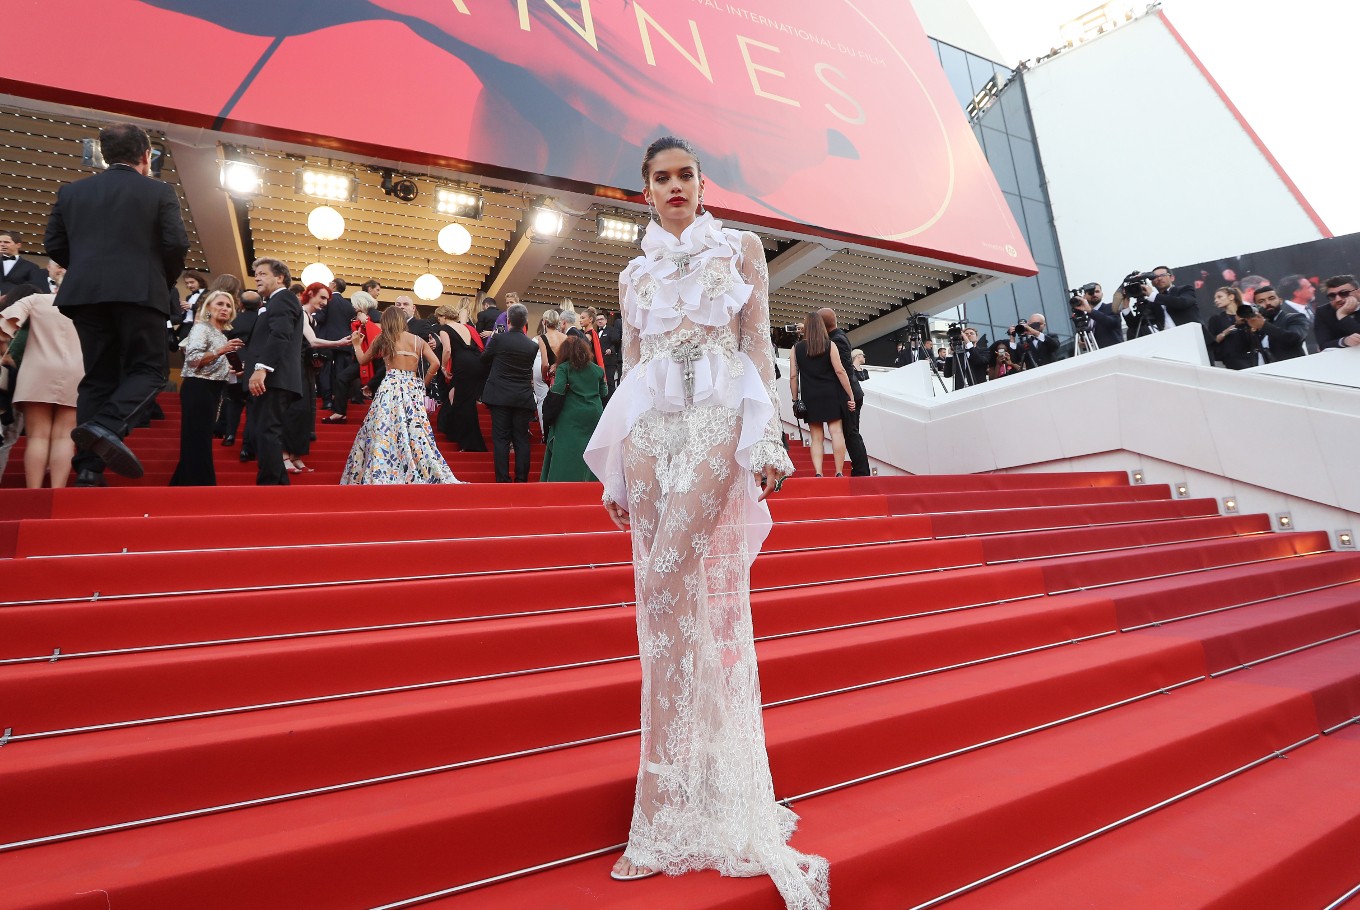 Six red carpet looks that turned heads at Cannes - Lifestyle - The ...